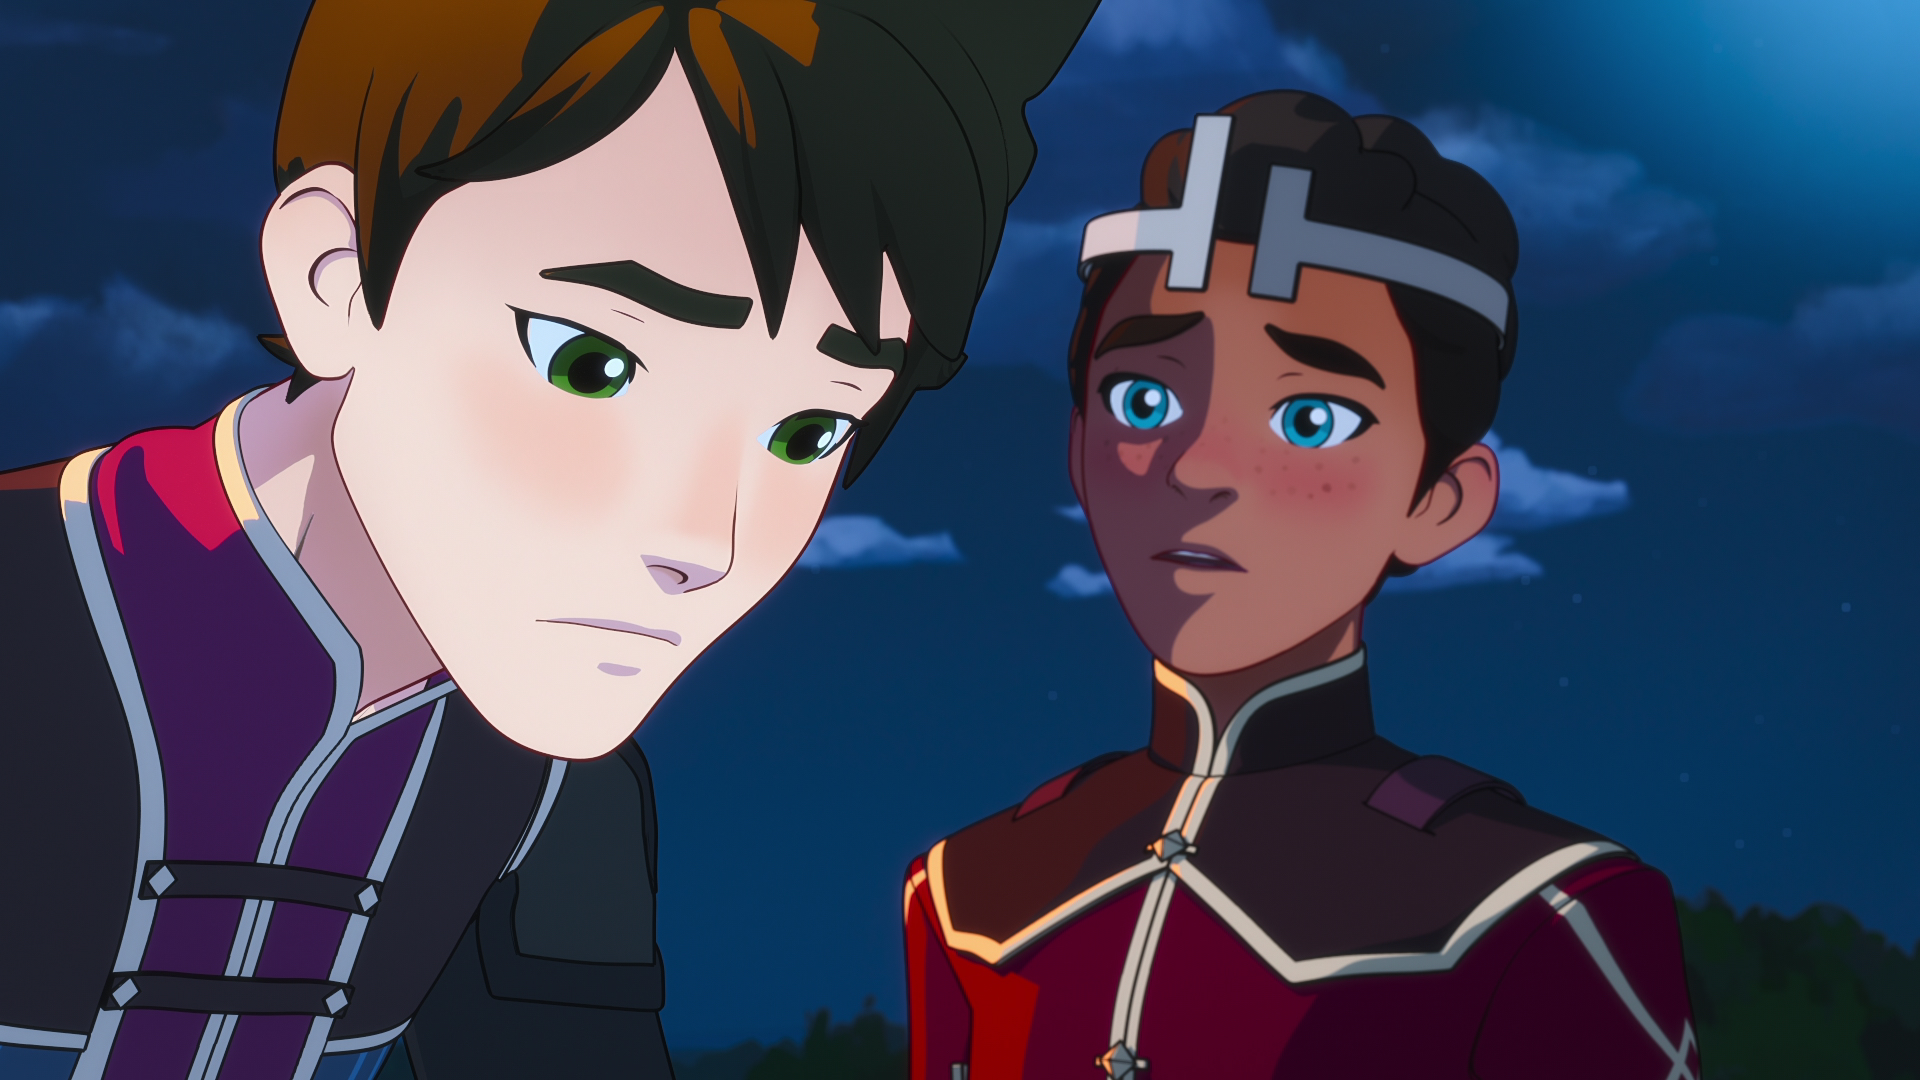 ezran, a young boy with light brown skin and curly dark hair wearing a crown, stands next to his brother callum, a paler boy with dark hair. callum slouches forward, frowning. ezran looks concerned. it is night time behind them.